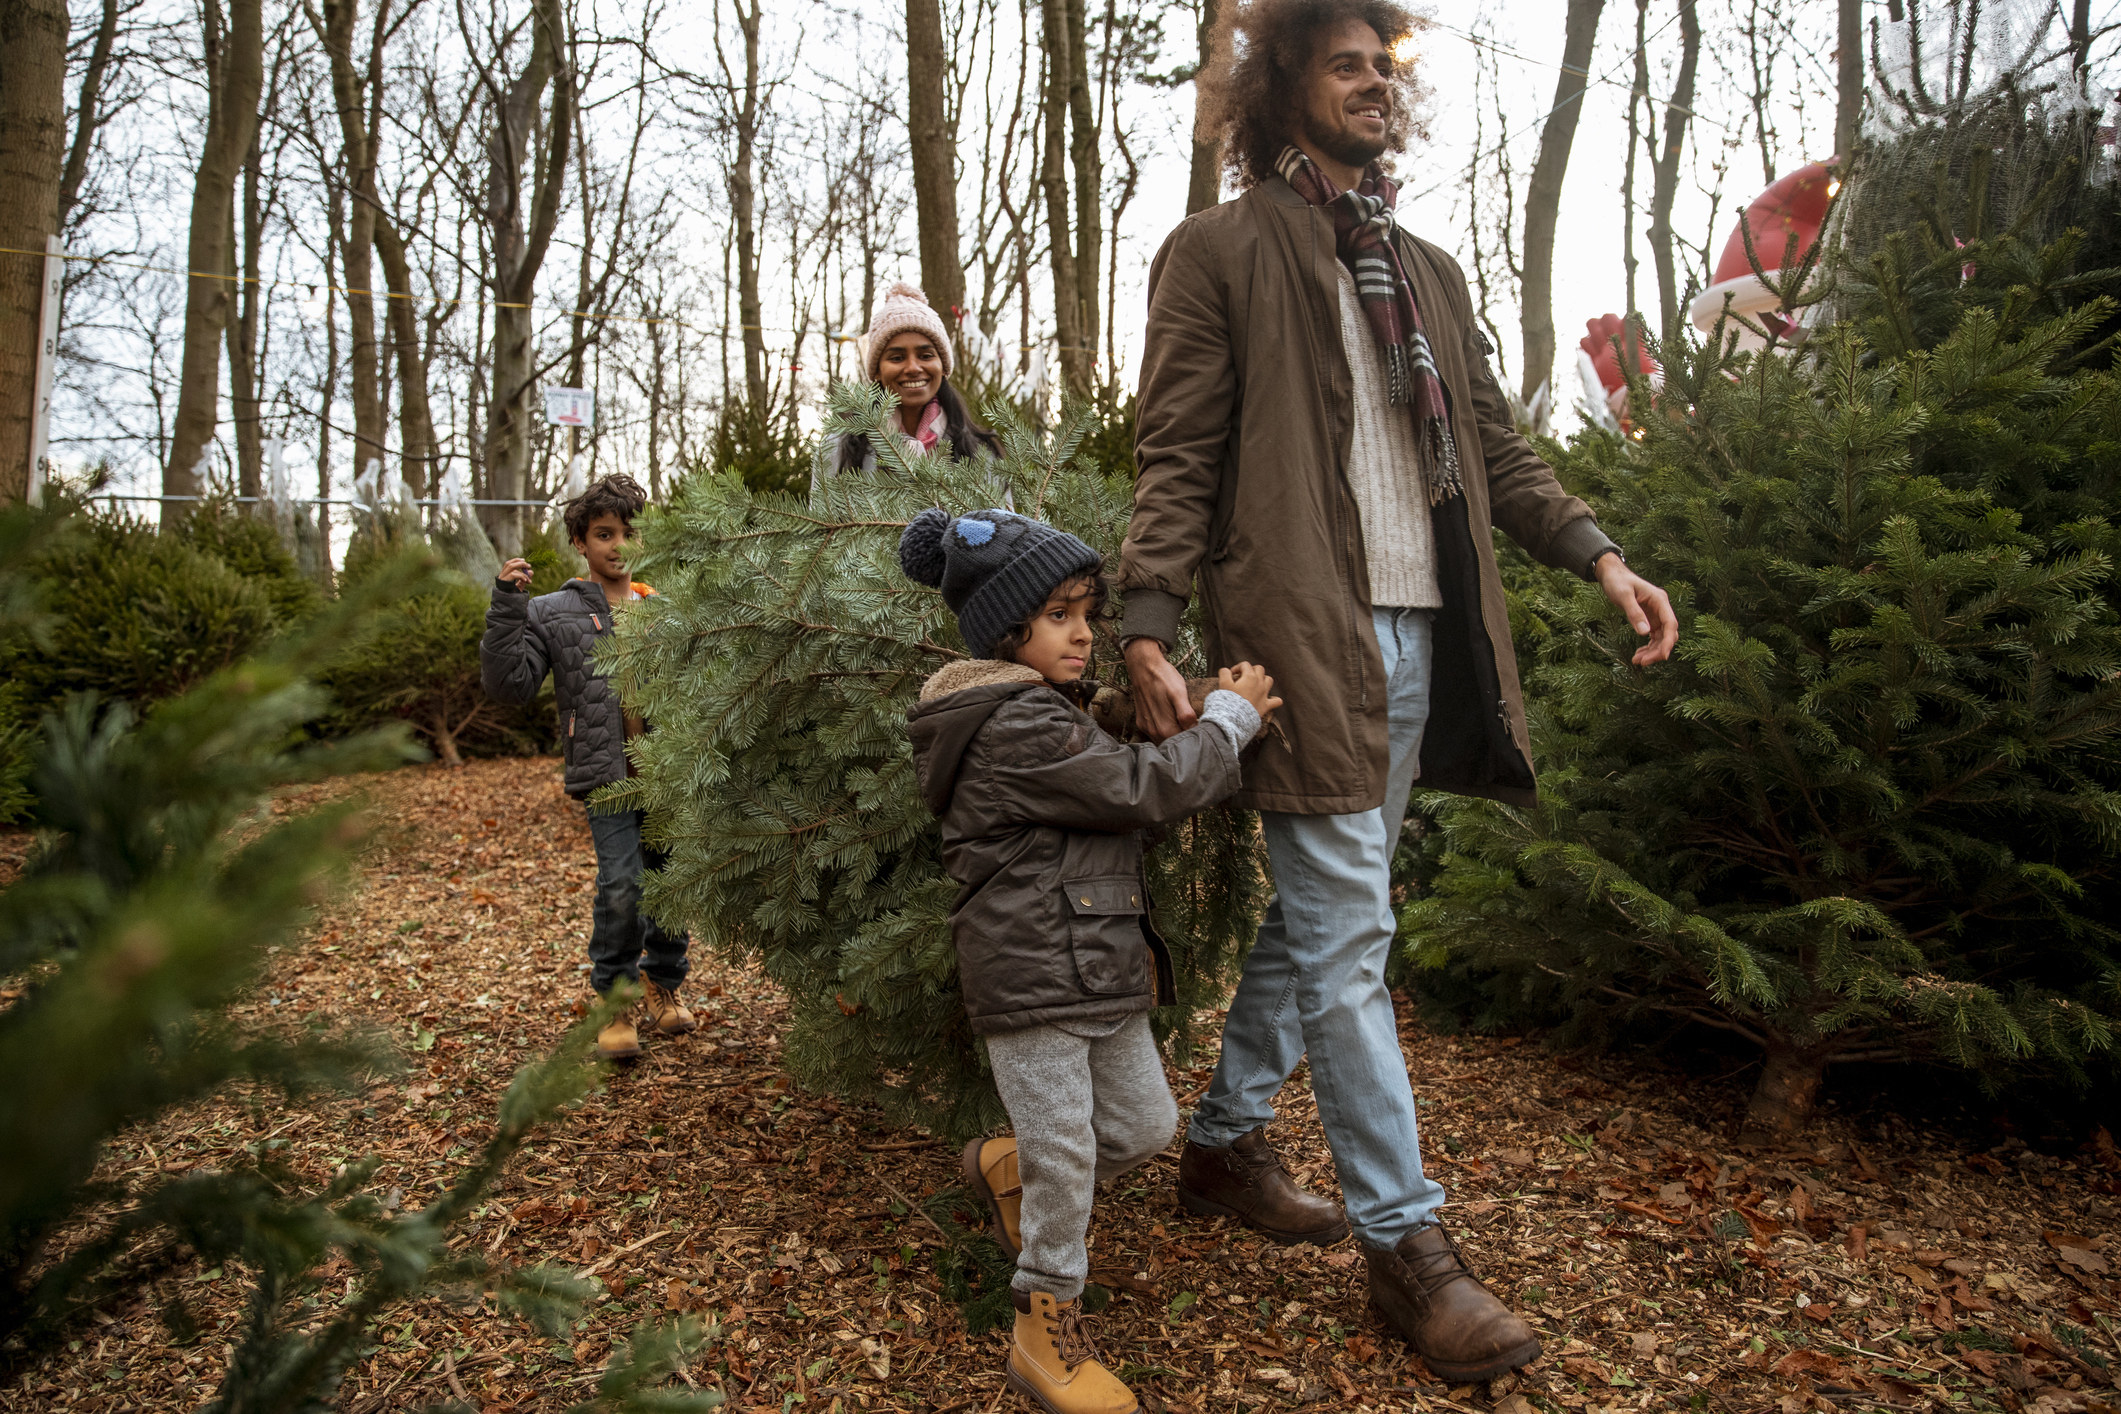 A family carries a Christmas tree at a tree farm.